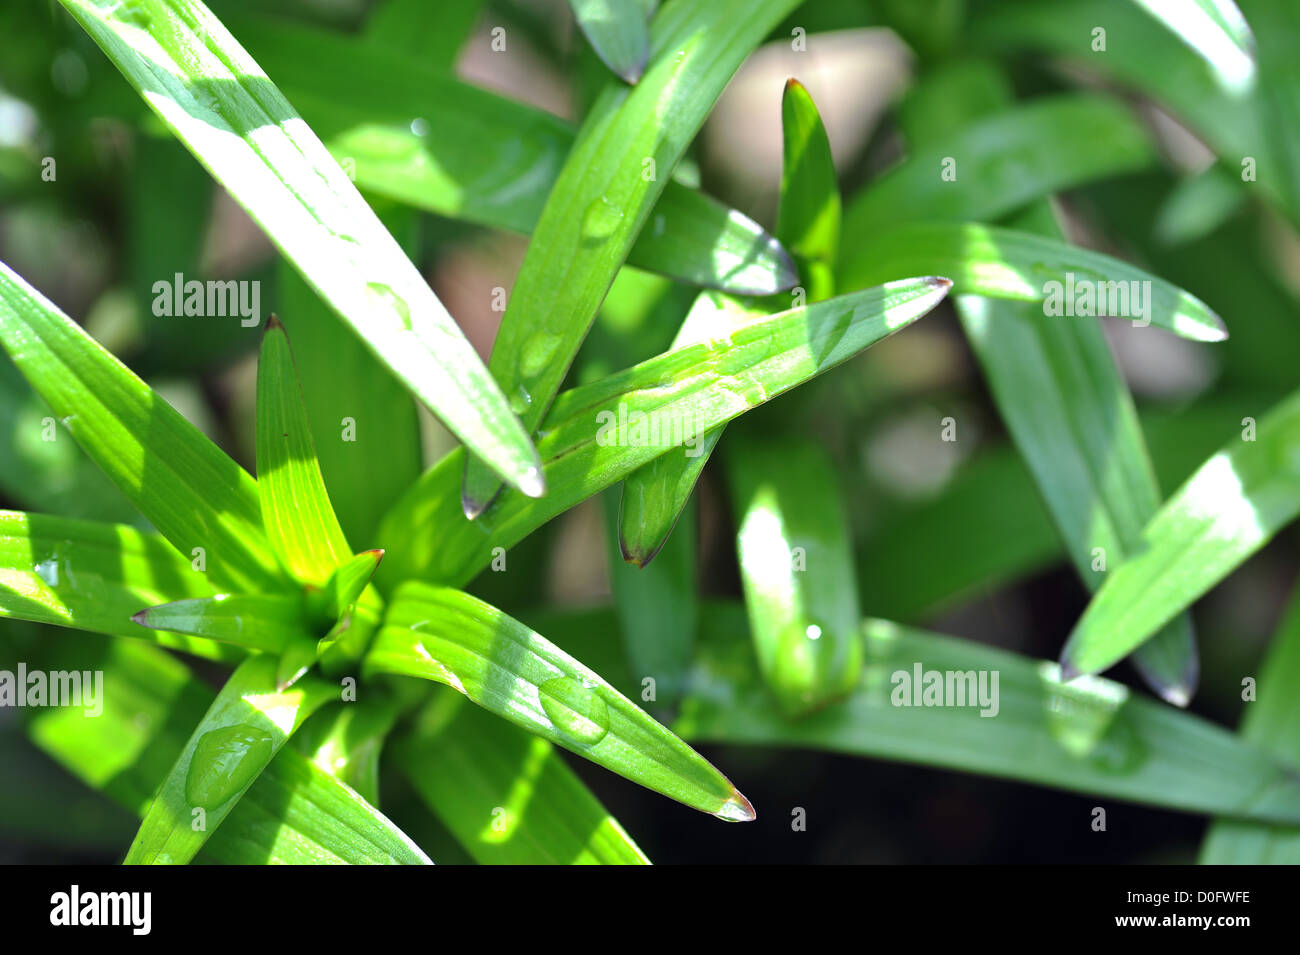 Vibrant green plant with spear shaped leaves speckled in water droplets Stock Photo